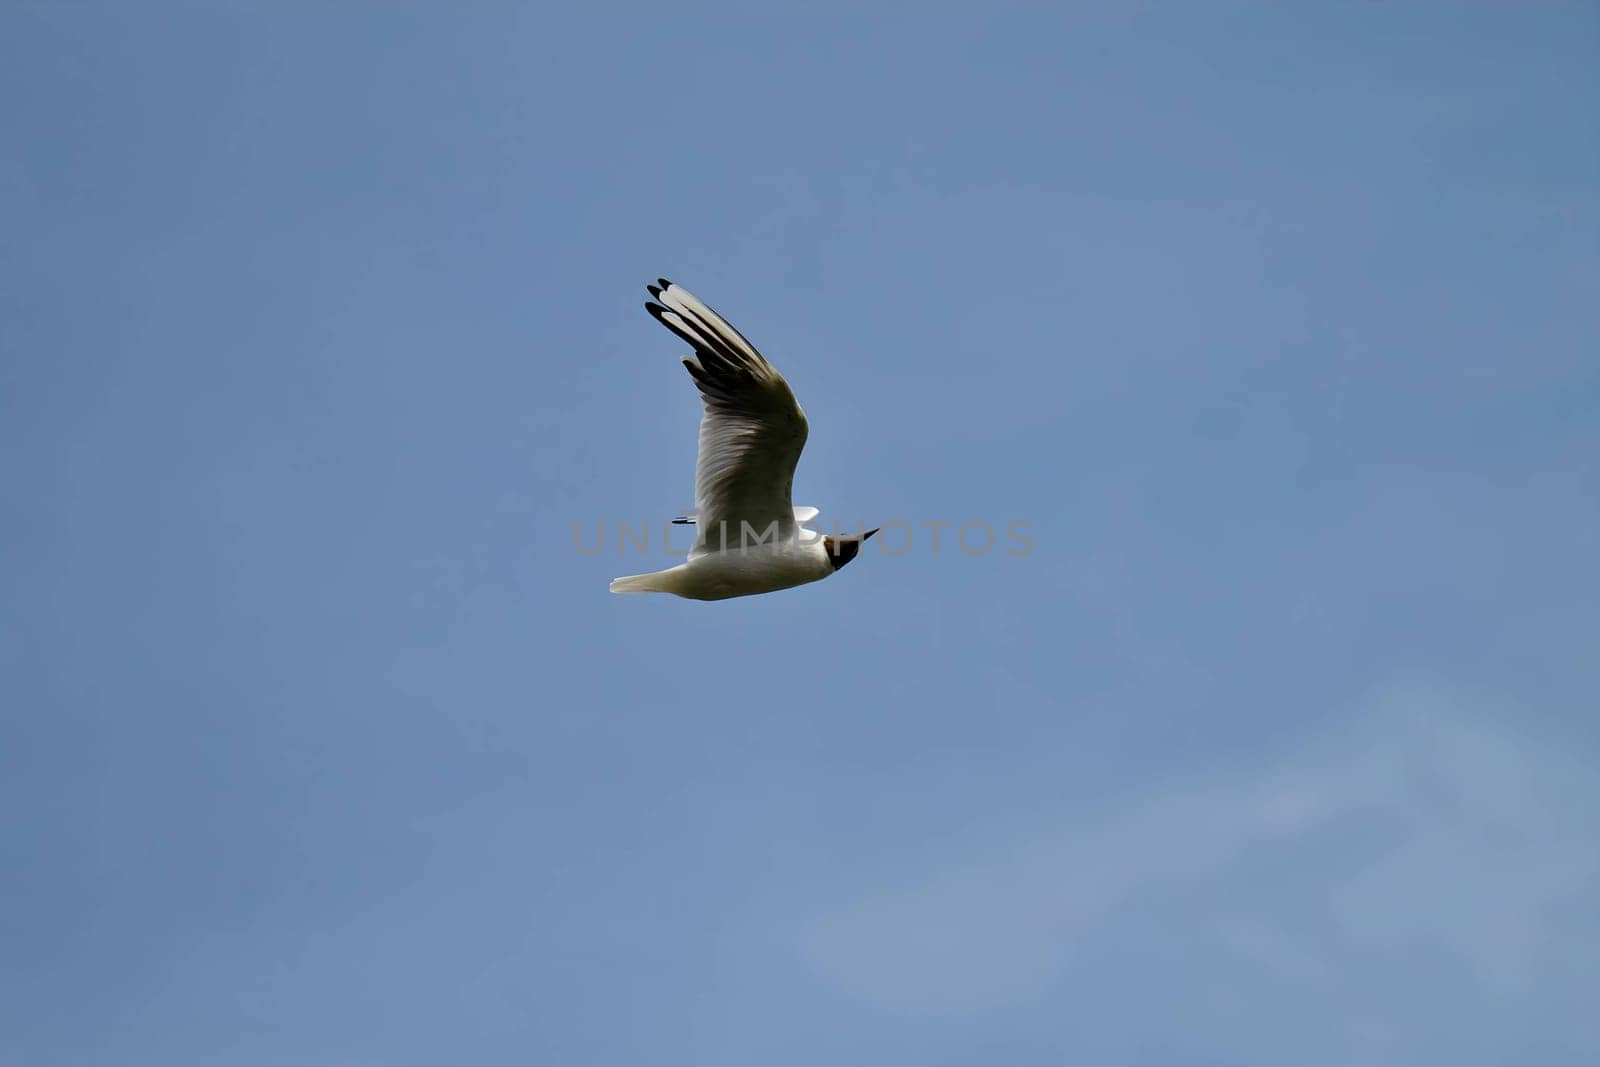 A graceful black-headed gull soaring high in the sky, a magnificent sight of nature's elegance.